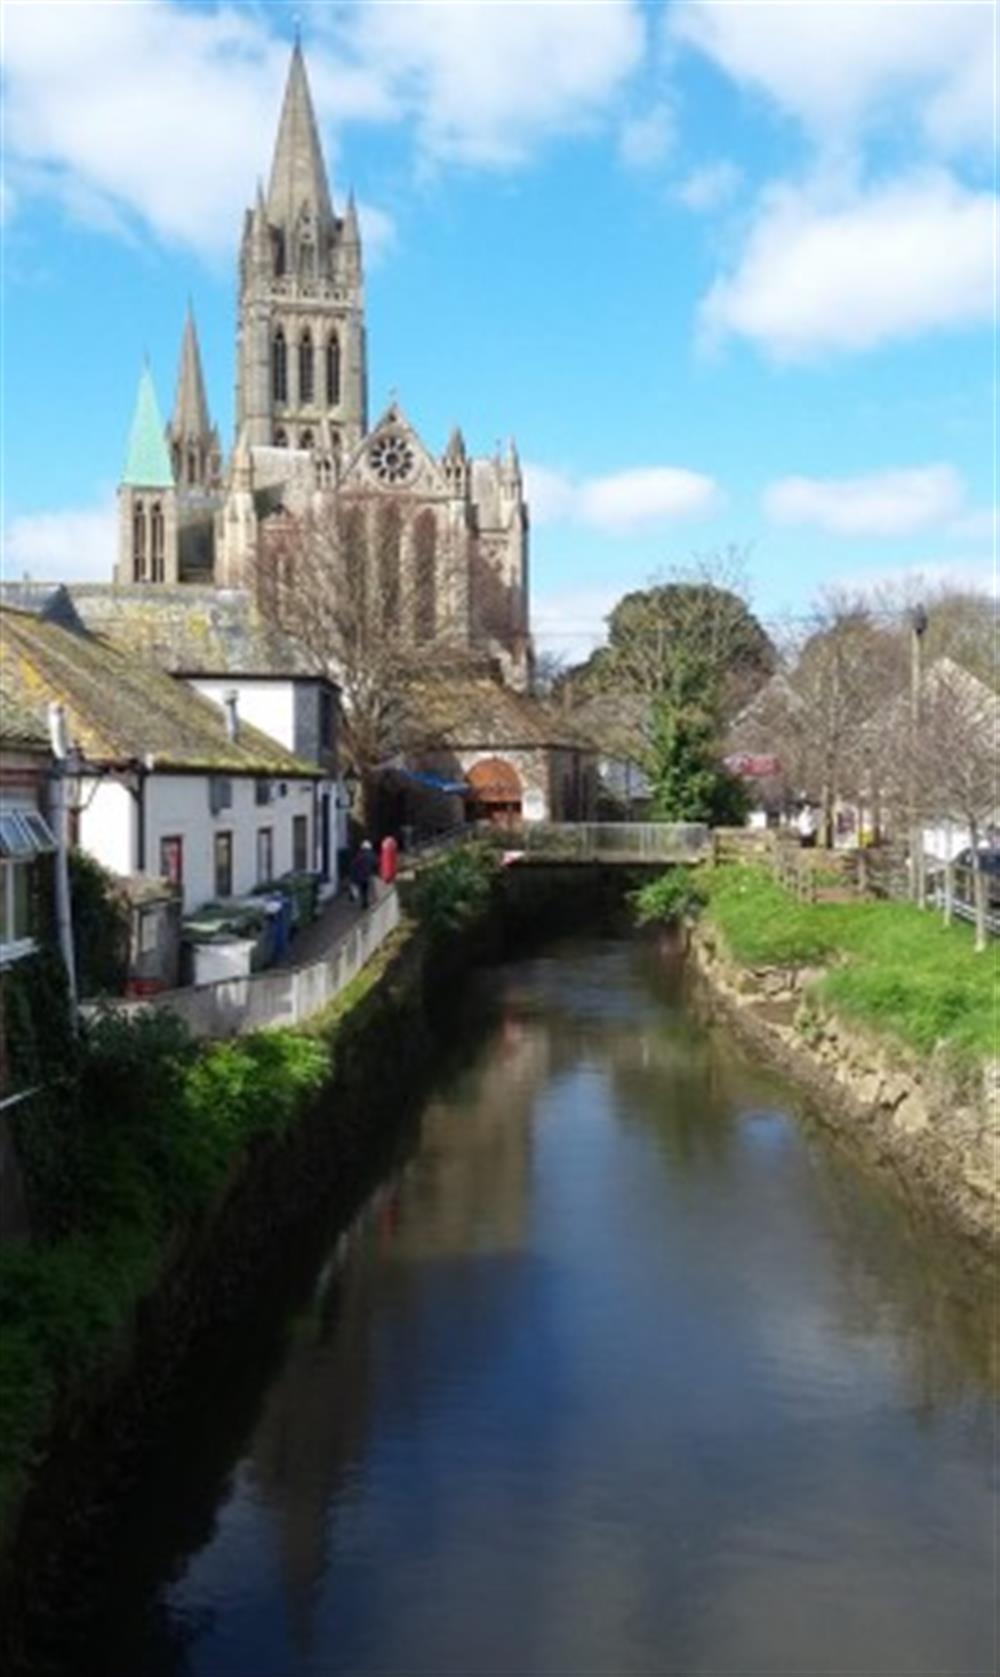 Truro is our main shopping centre and also the capital of our county! The cathedral is particularly beautiful, inside and out.